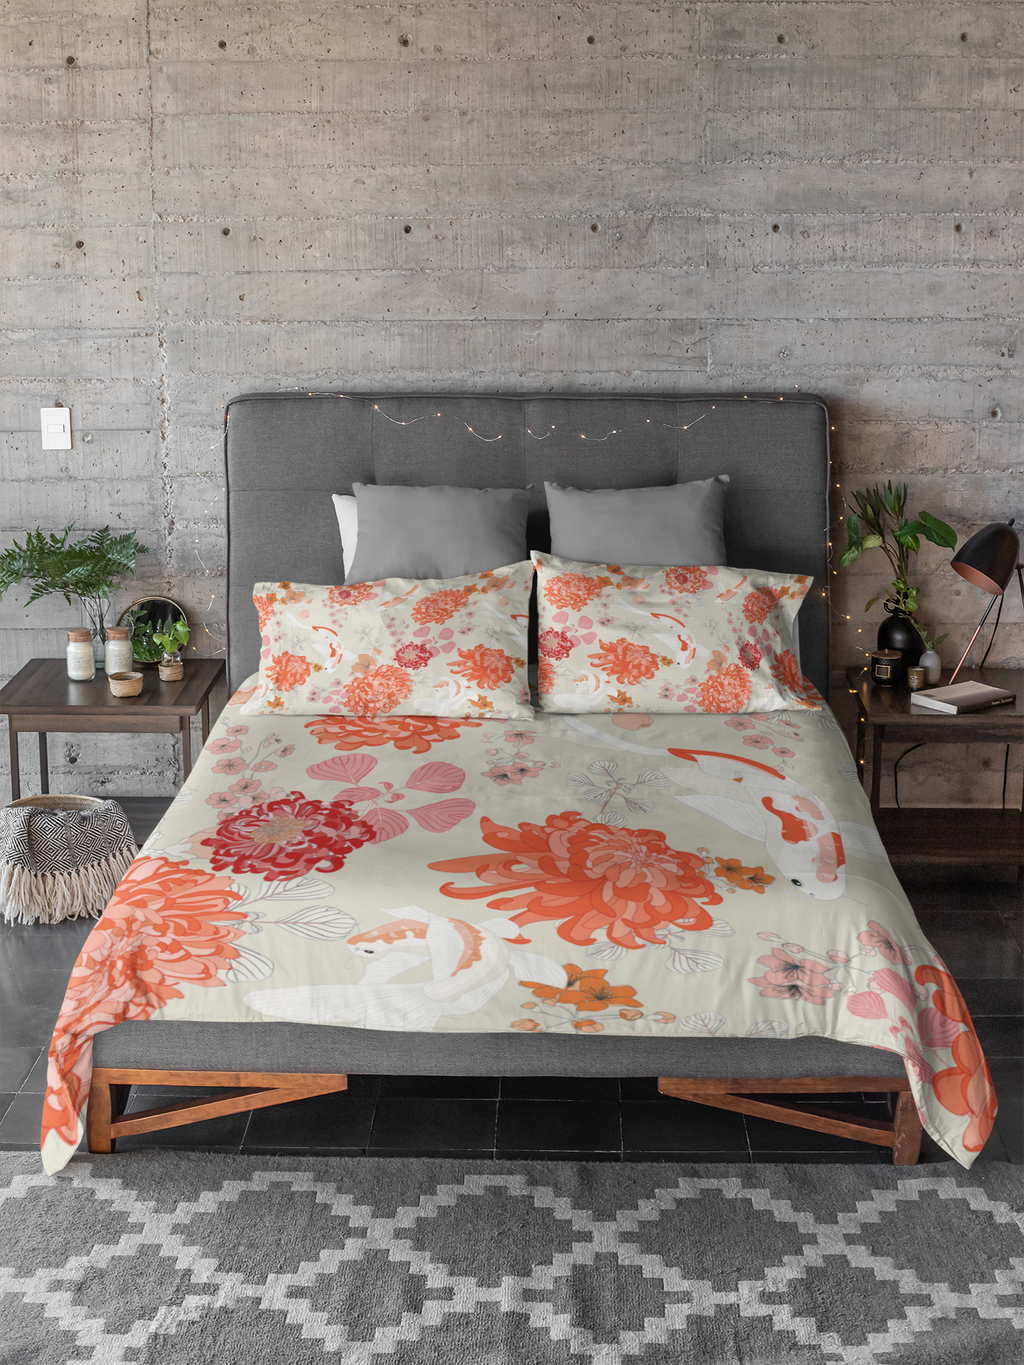 duvet-cover-mockup-featuring-two-bed-pillows-31291 (3).png